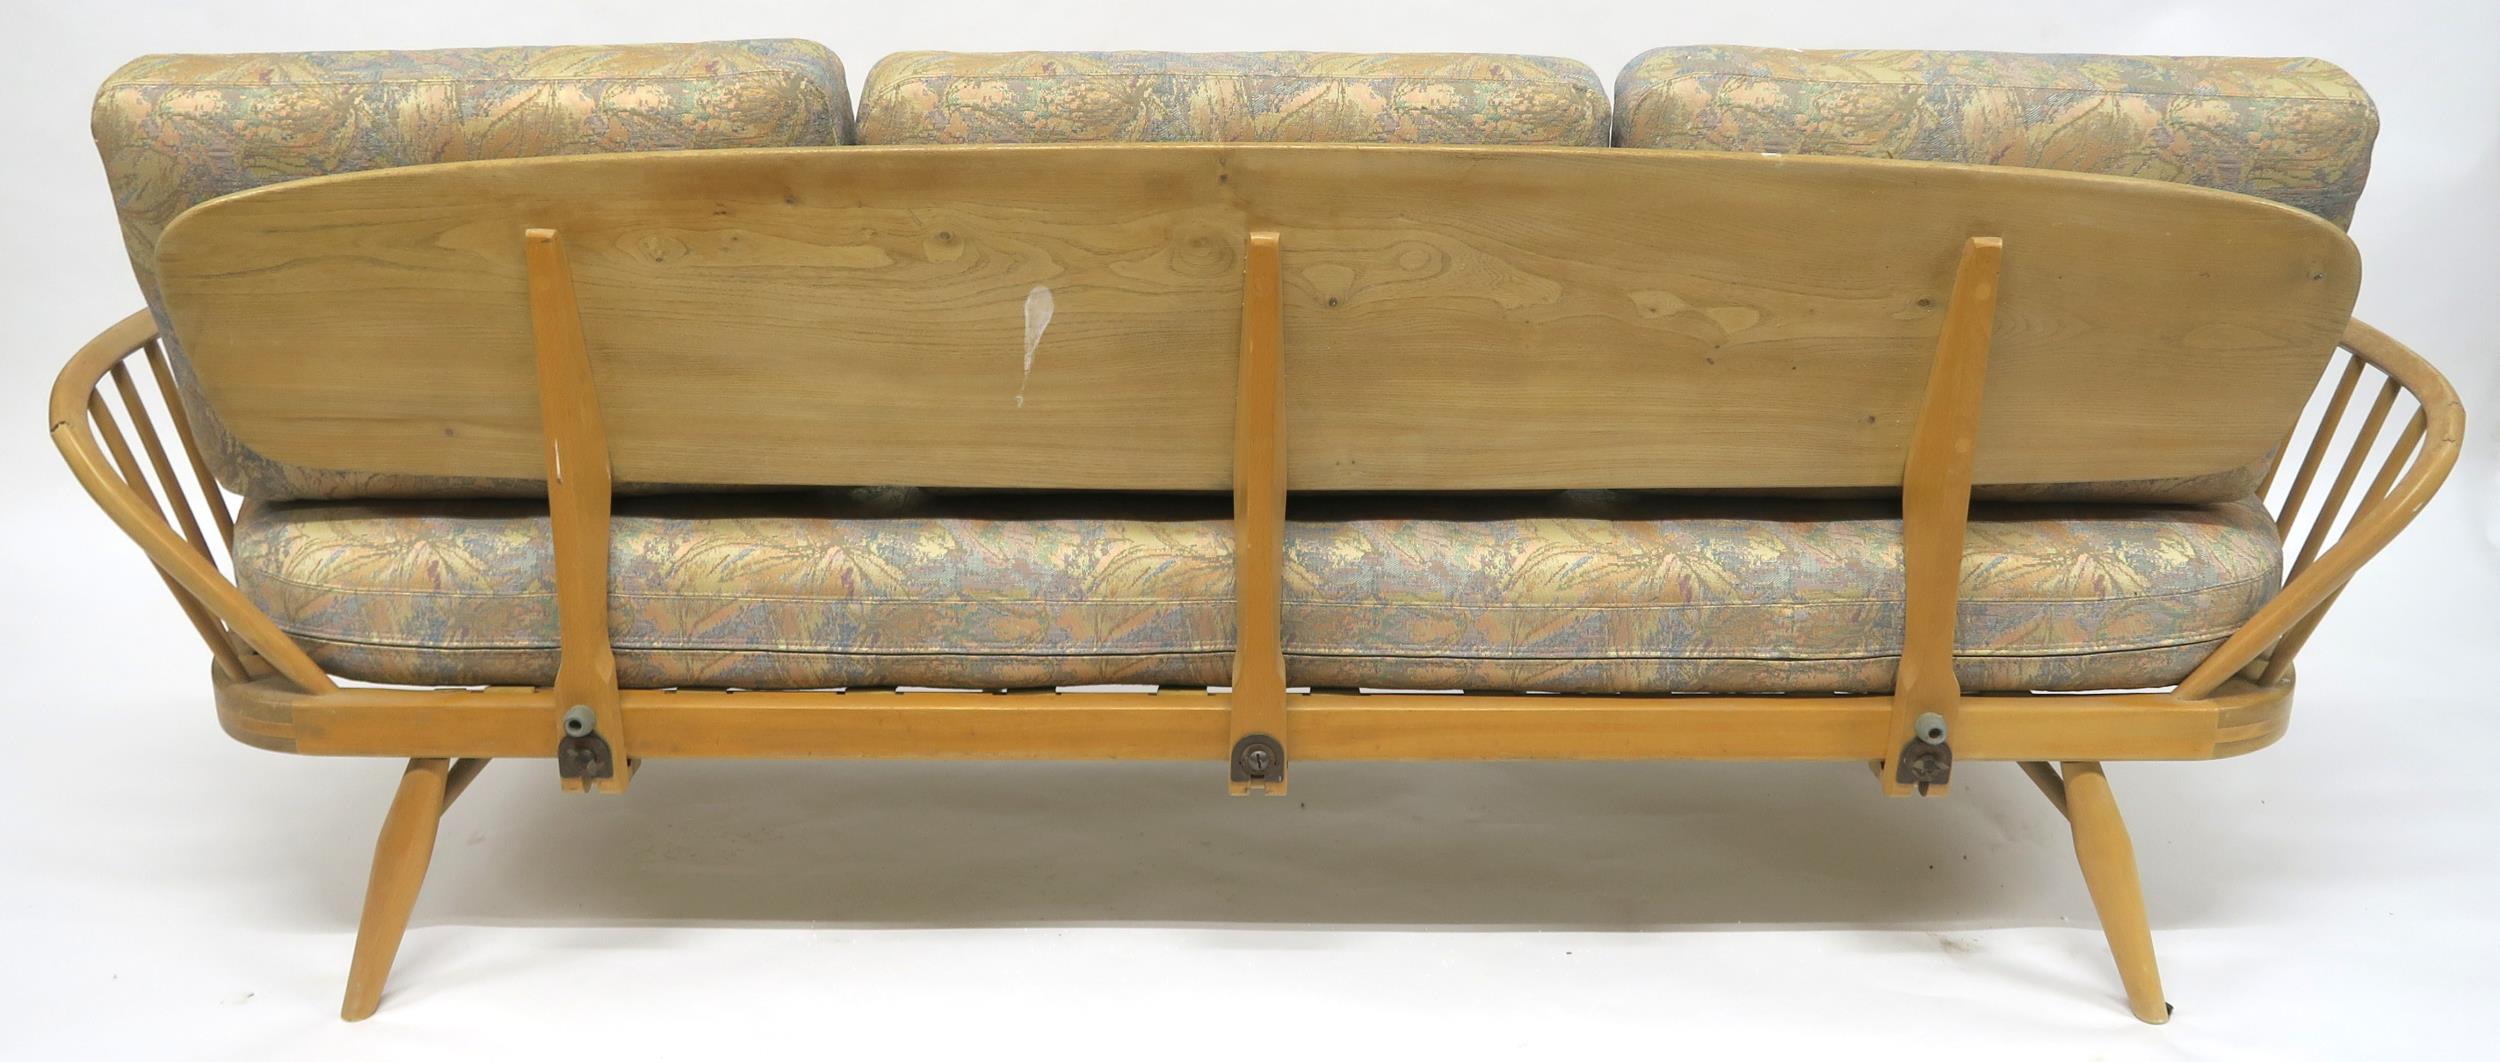 A MID 20TH CENTURY ELM AND BEECH FRAMED ERCOL DAY BED with floral upholstered cushions, 77cm high - Image 11 of 11